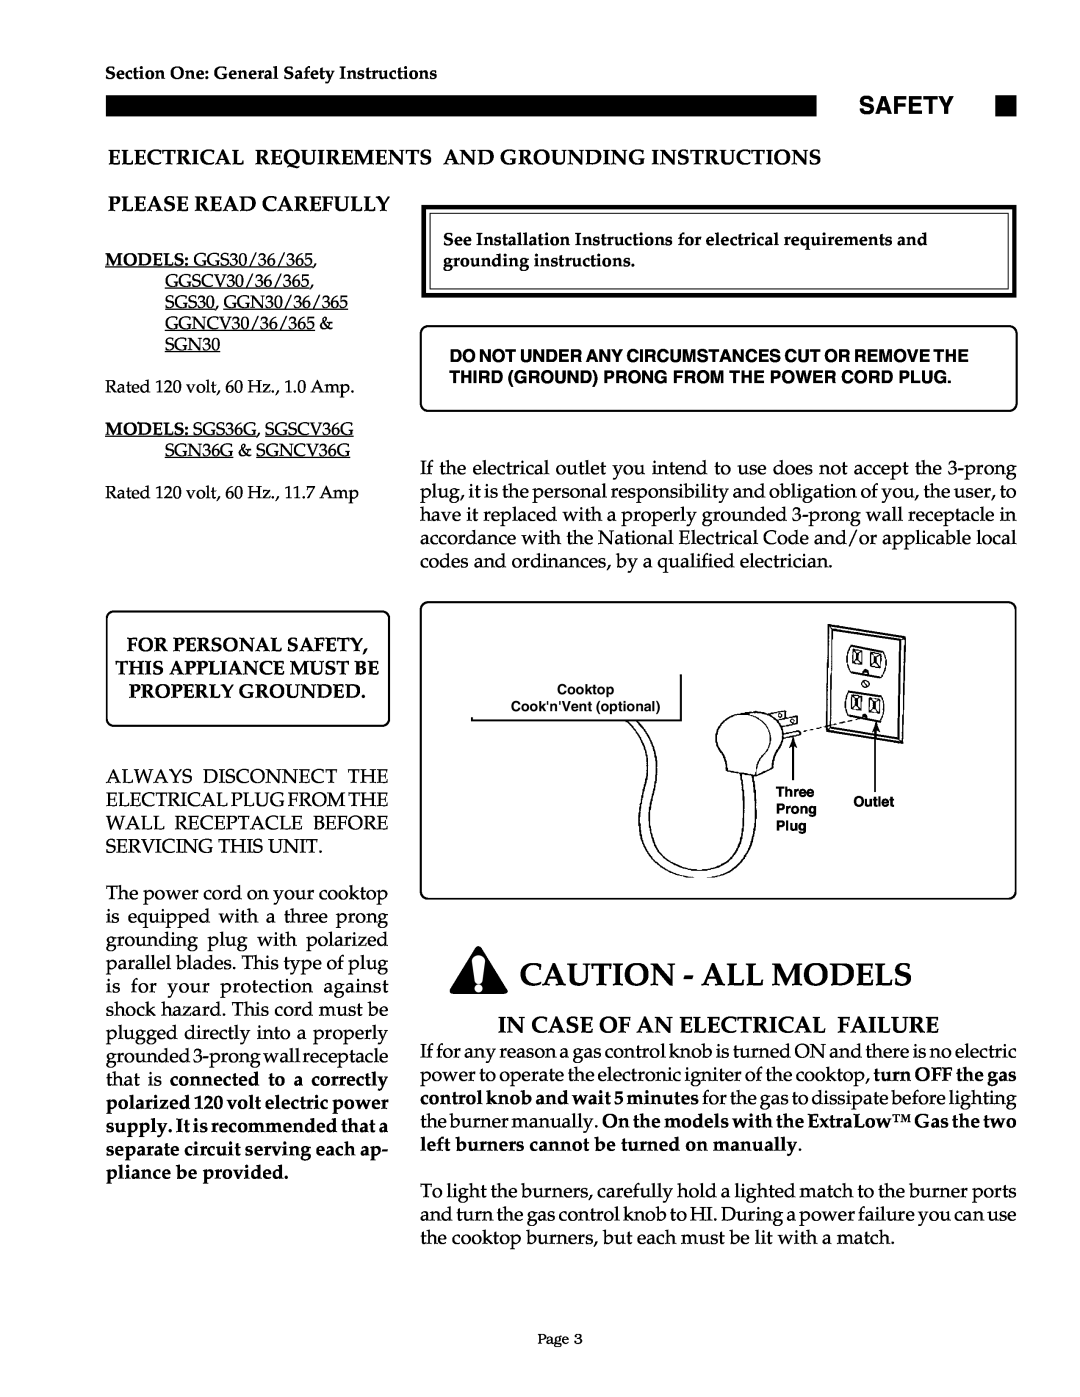 Thermador GGN30 Safety, Electrical Requirements And Grounding Instructions, Please Read Carefully, Caution - All Models 